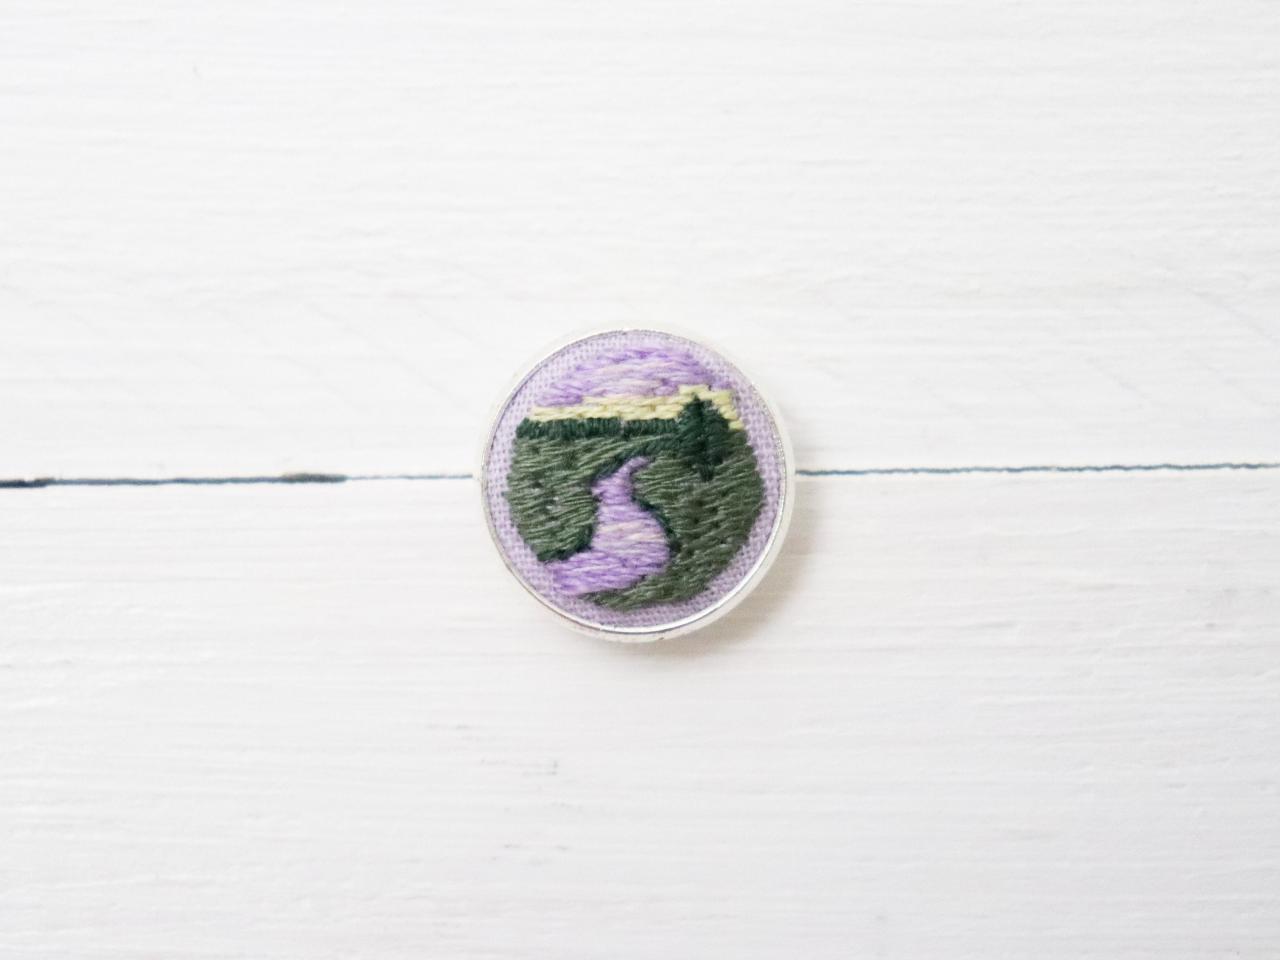 Miniature embroidery pin River brooch River pin Embroidery pin Hand embroidery Embroidered pin Landscape collar pin Landscape pin Nature pin